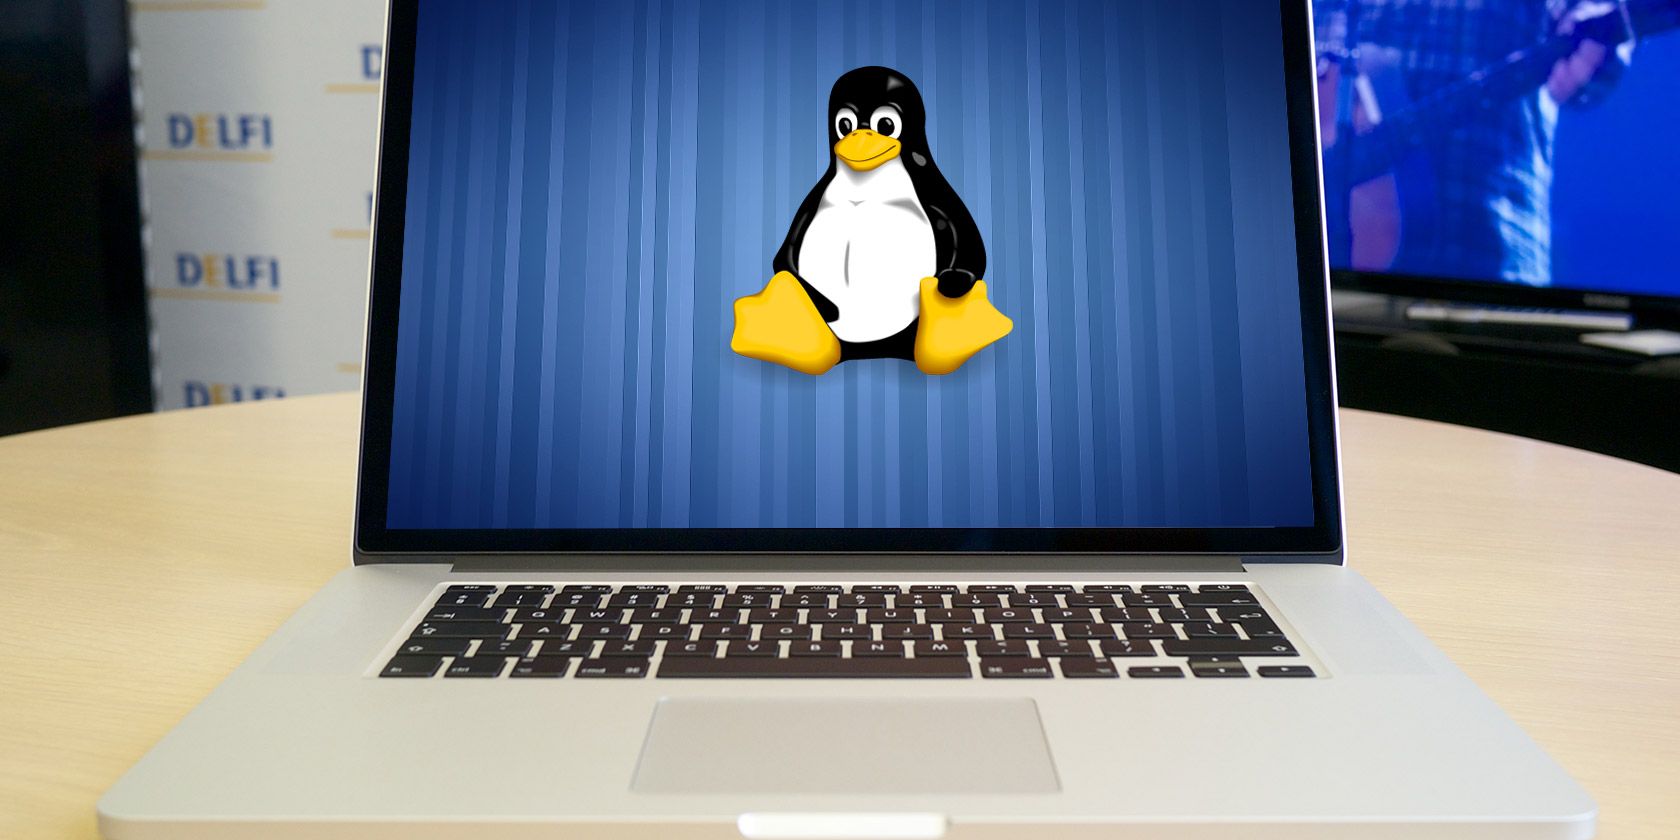 How to Install and Dual Boot Linux on Your Mac